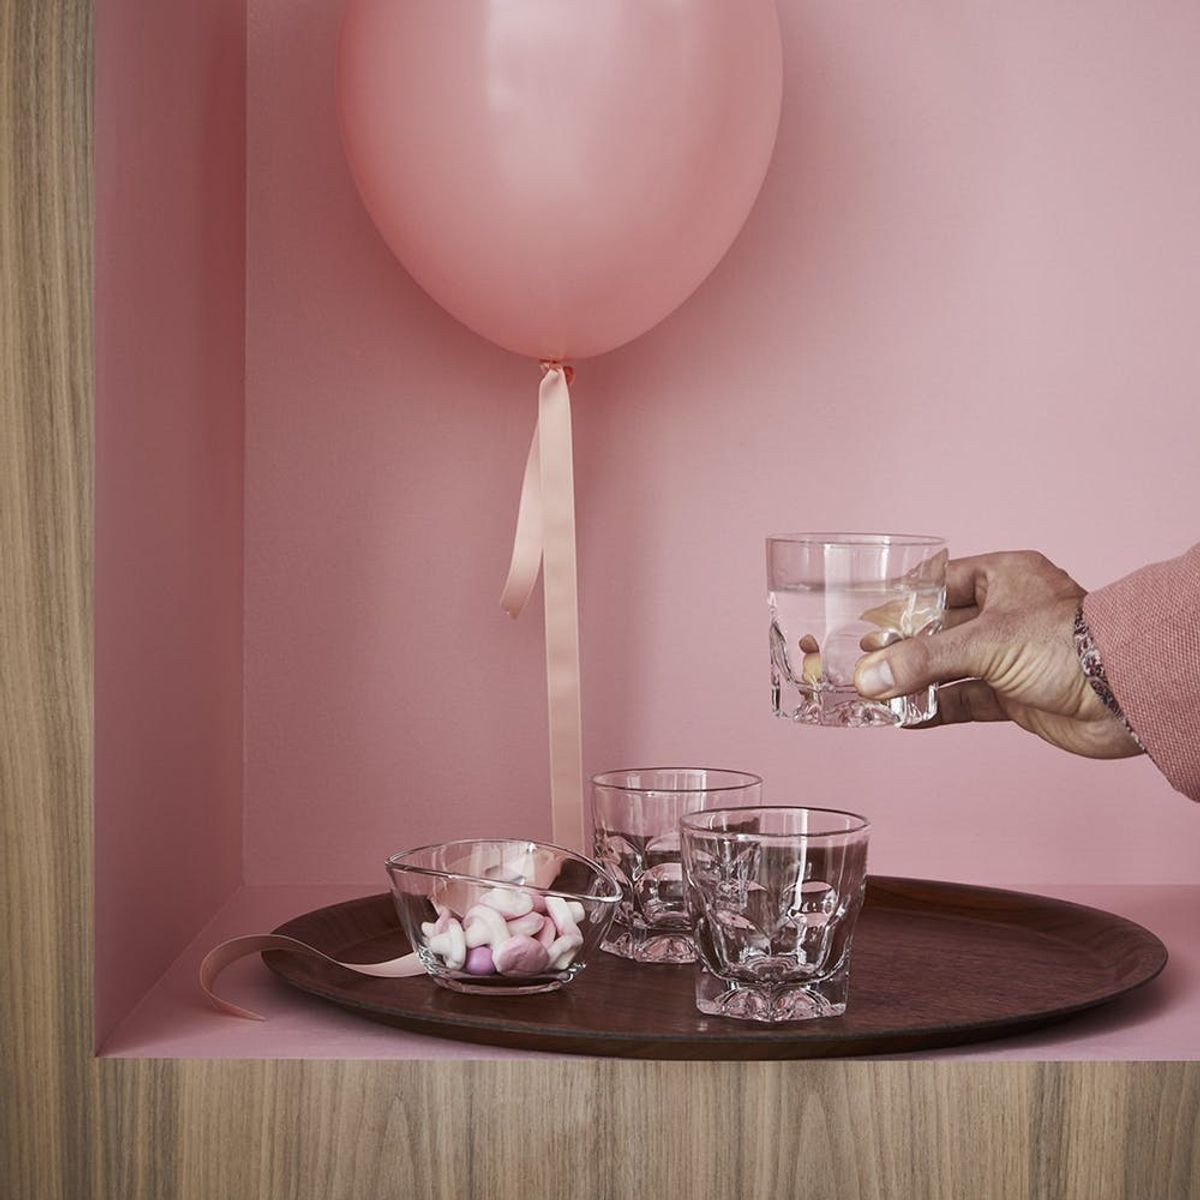 IKEA Is Having an Epic Birthday Party Next Weekend and We Want In